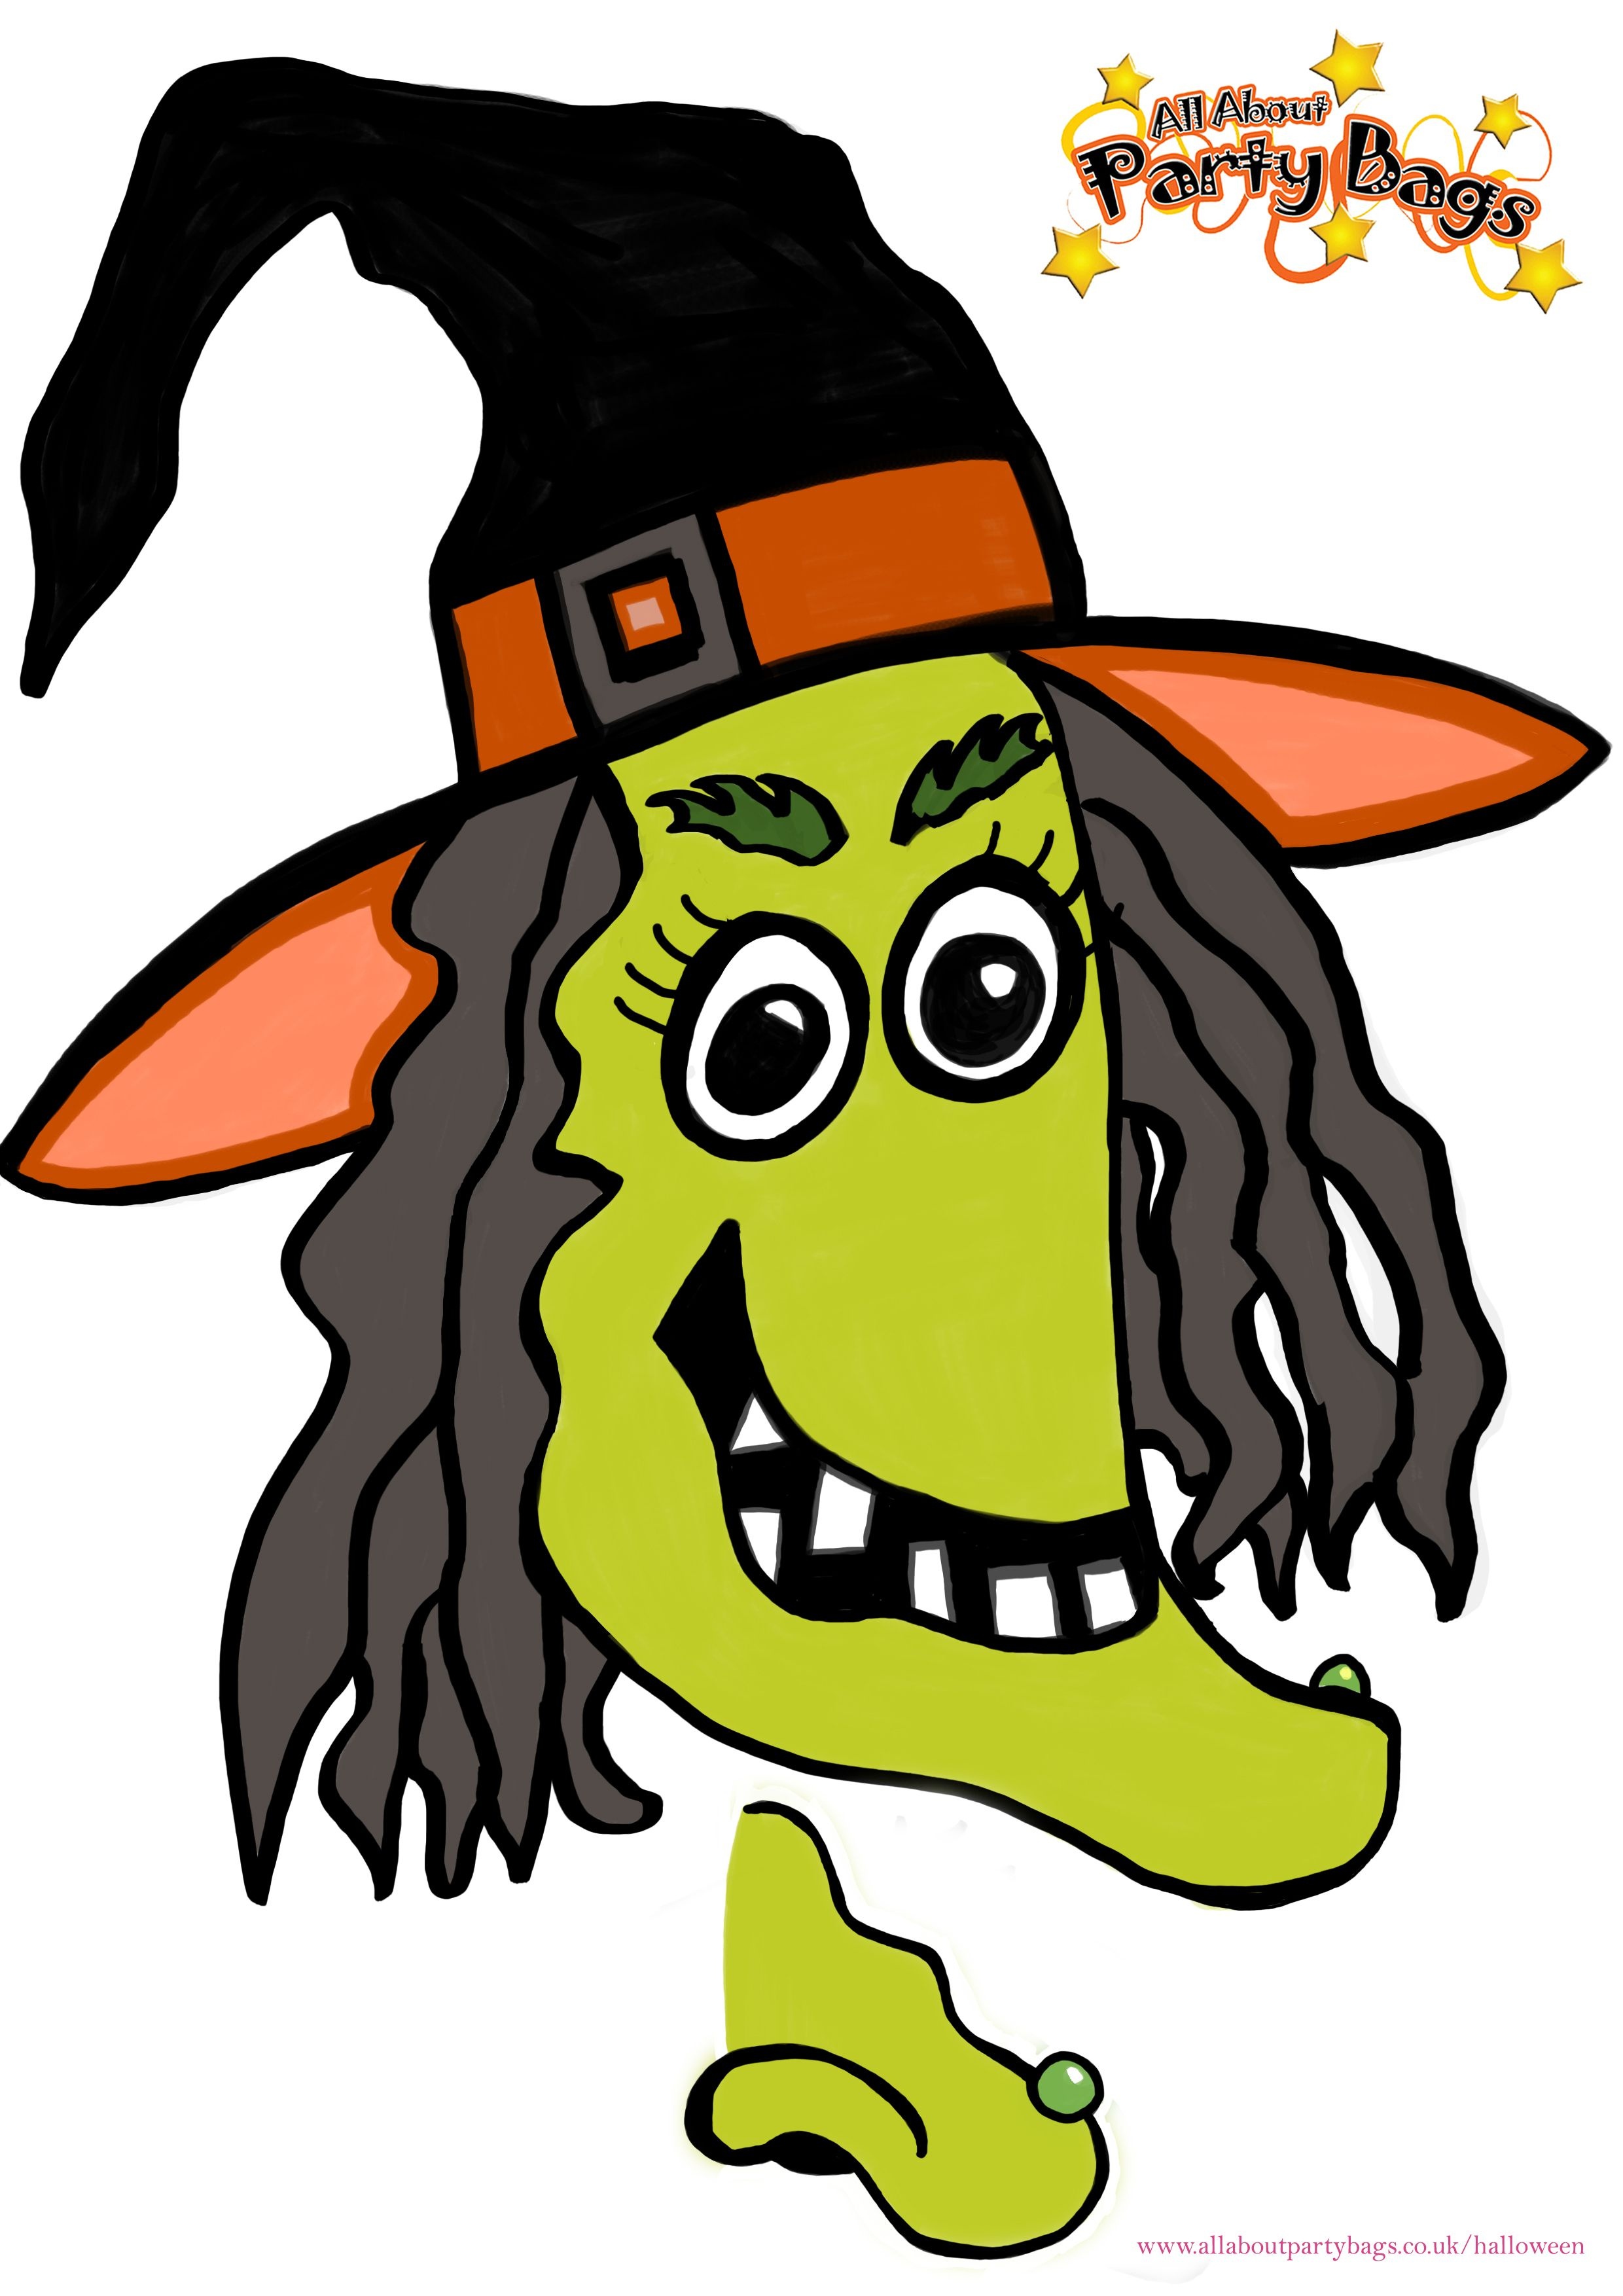 Free Printable Pin The Nose On The Witch Game. | Party! | Halloween - Free Printable Pictures Of Witches